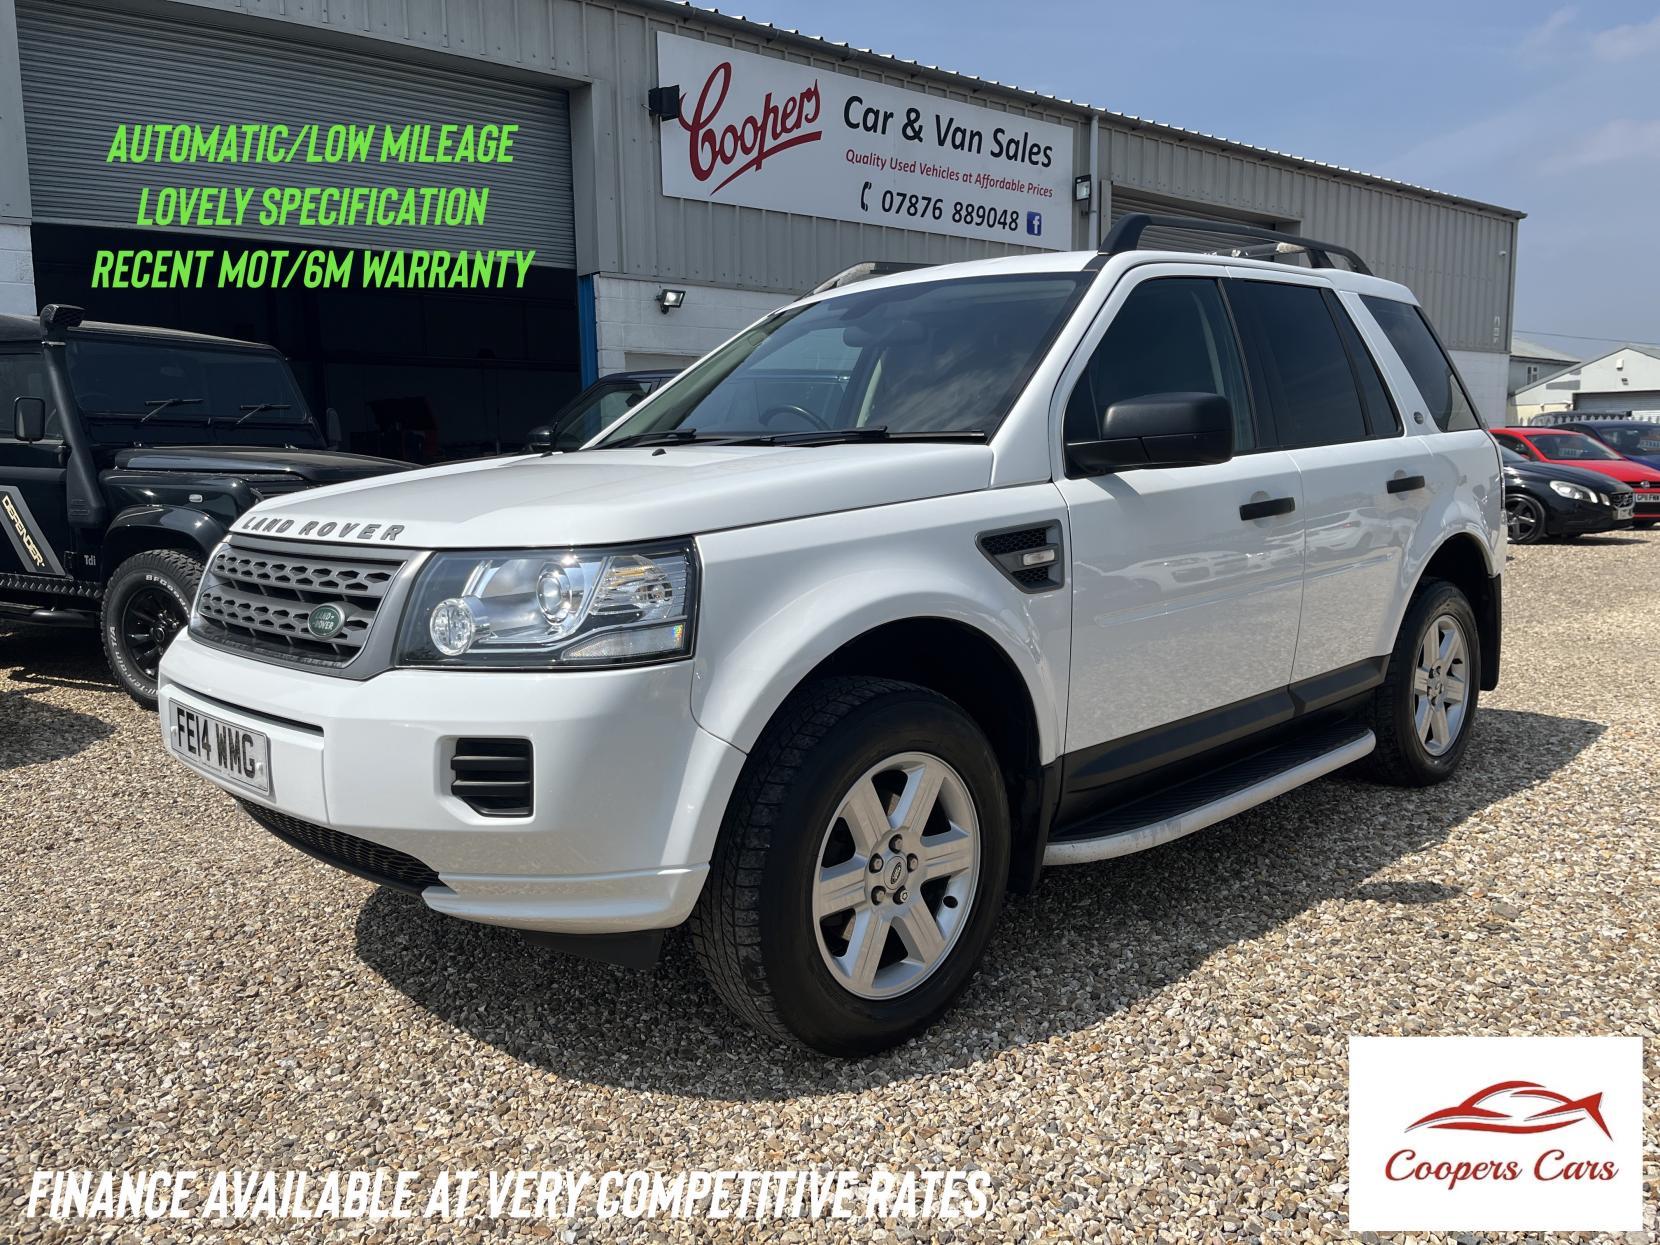 Land Rover Freelander 2 2.2 SD4 GS SUV 5dr Diesel CommandShift 4WD Euro 5 (190 ps)